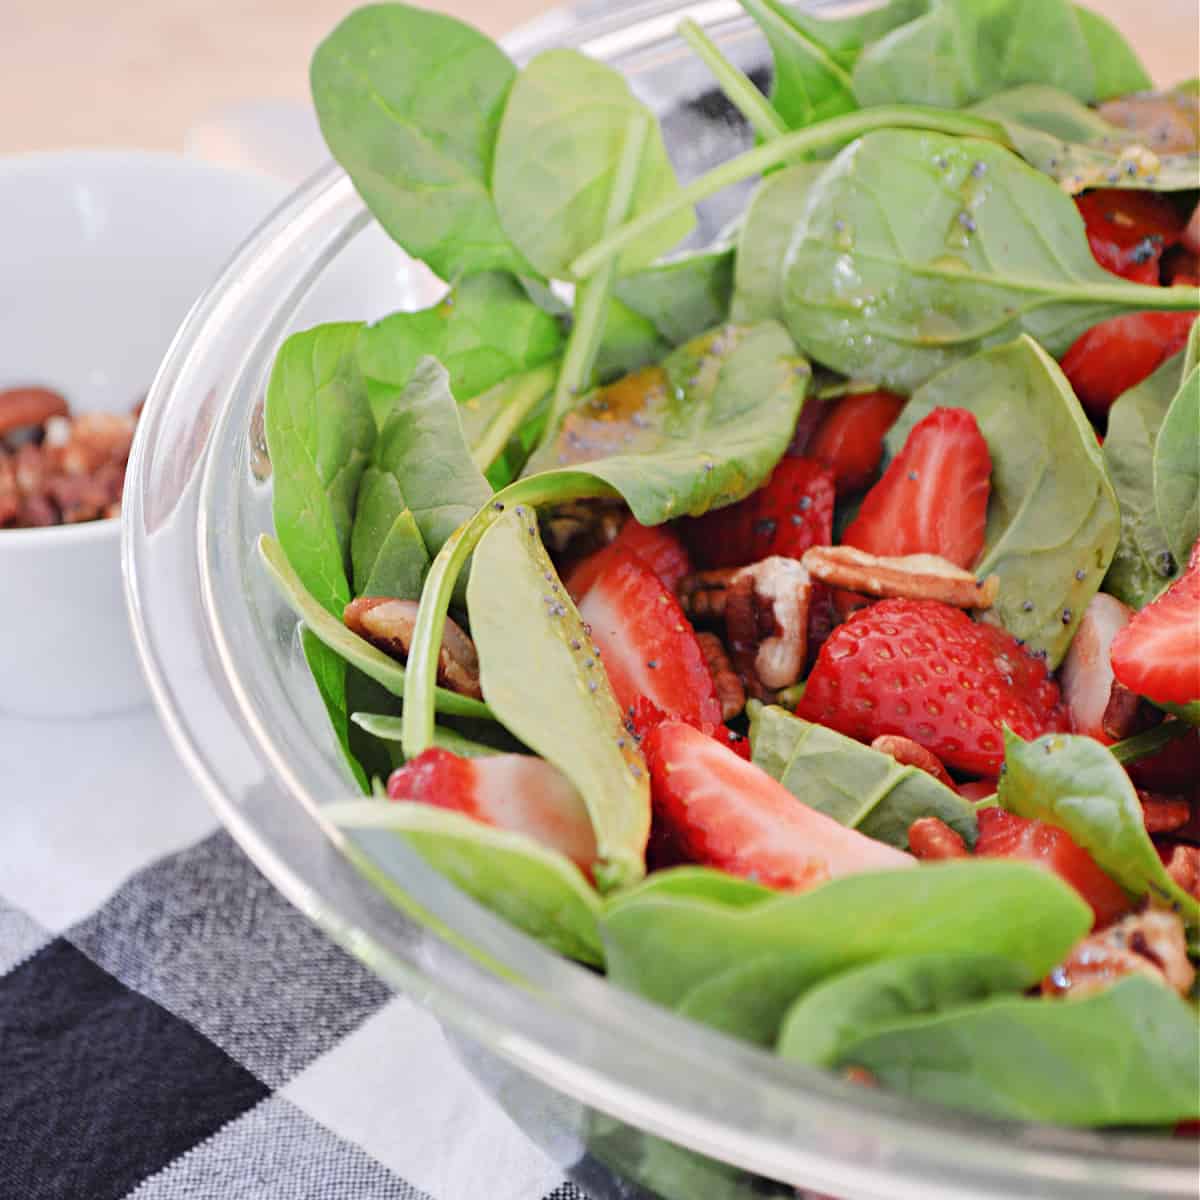 Spinach Strawberry Salad with Poppy Seed Dressing